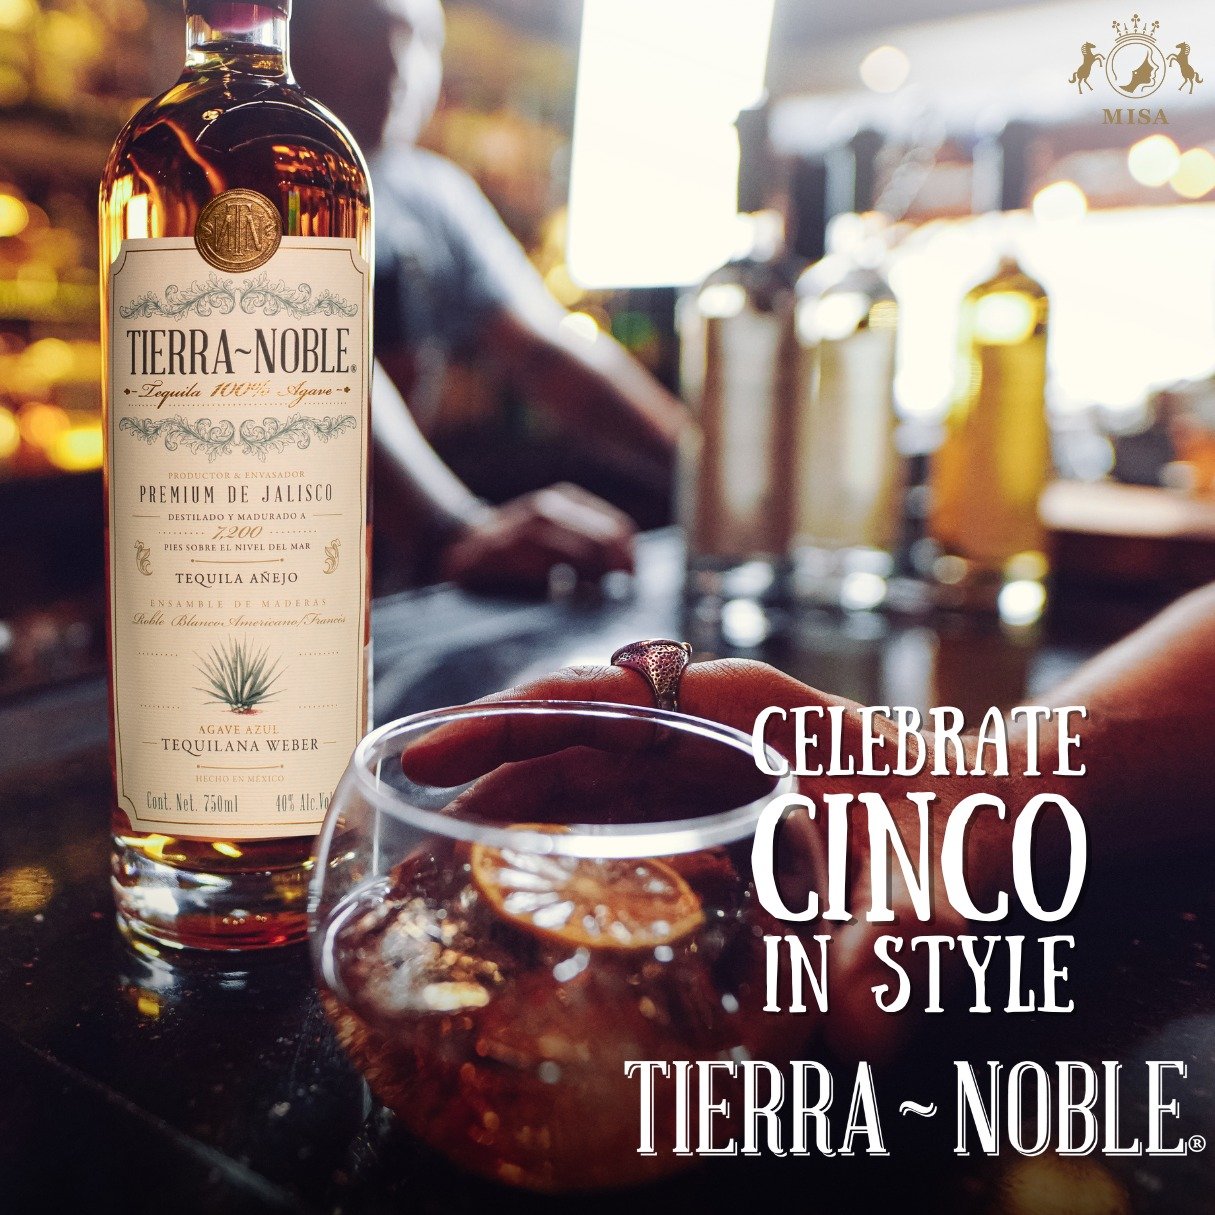 &iexcl;Feliz Cinco de Mayo! MISA imports is proud to offer excellent selections of tequila and mezcal, including Tierra Noble Tequila and Casa Manglar Mezcal. 

Tierra Noble is the Grand Cru of Tequila. Handcrafted at their La Estacada distillery 7,2